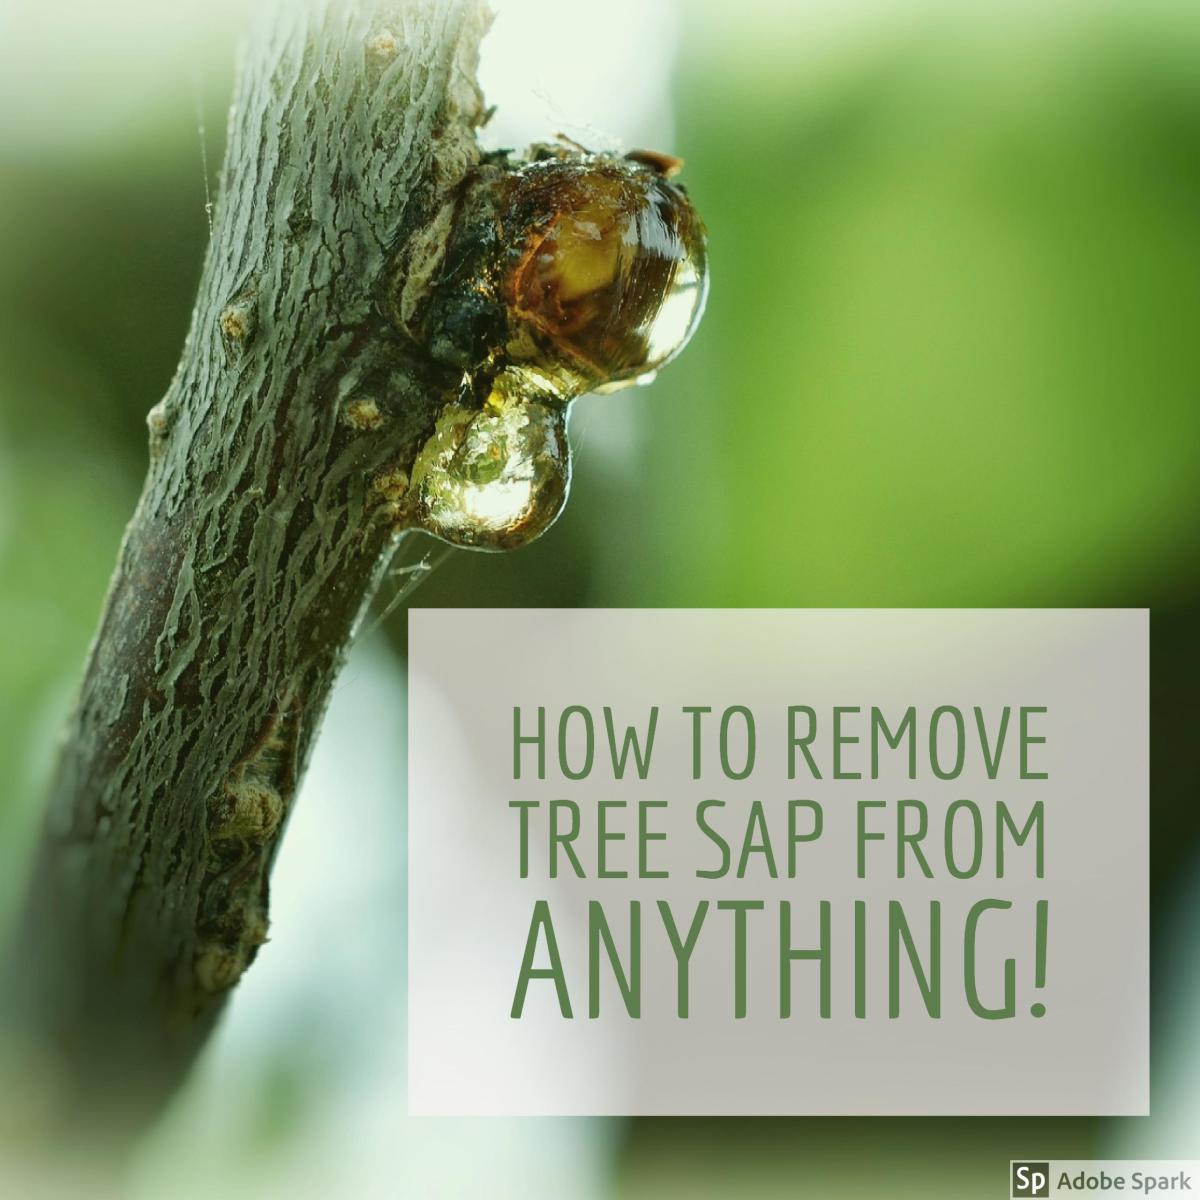 How to Remove Sticky Tree Sap or Pine Pitch From Almost Anything